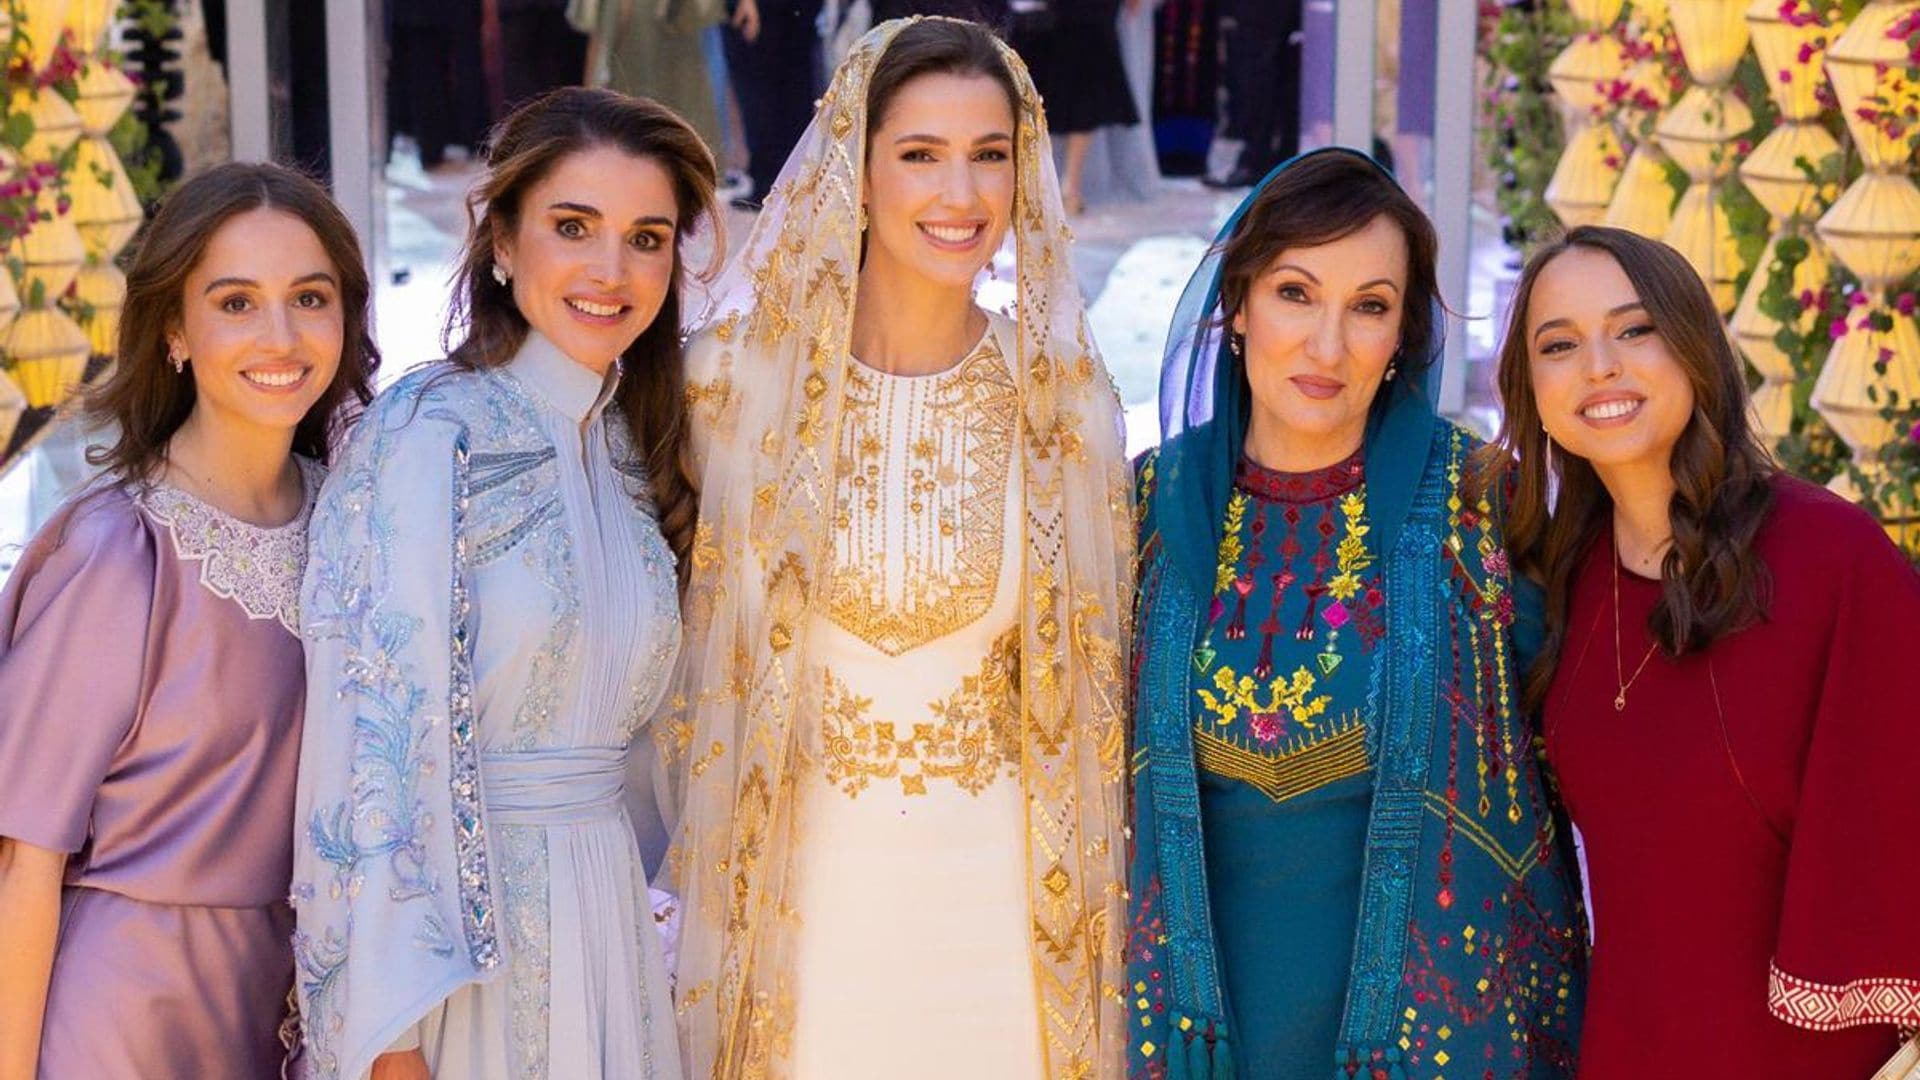 Queen Rania hosts Henna Party for future daughter in law